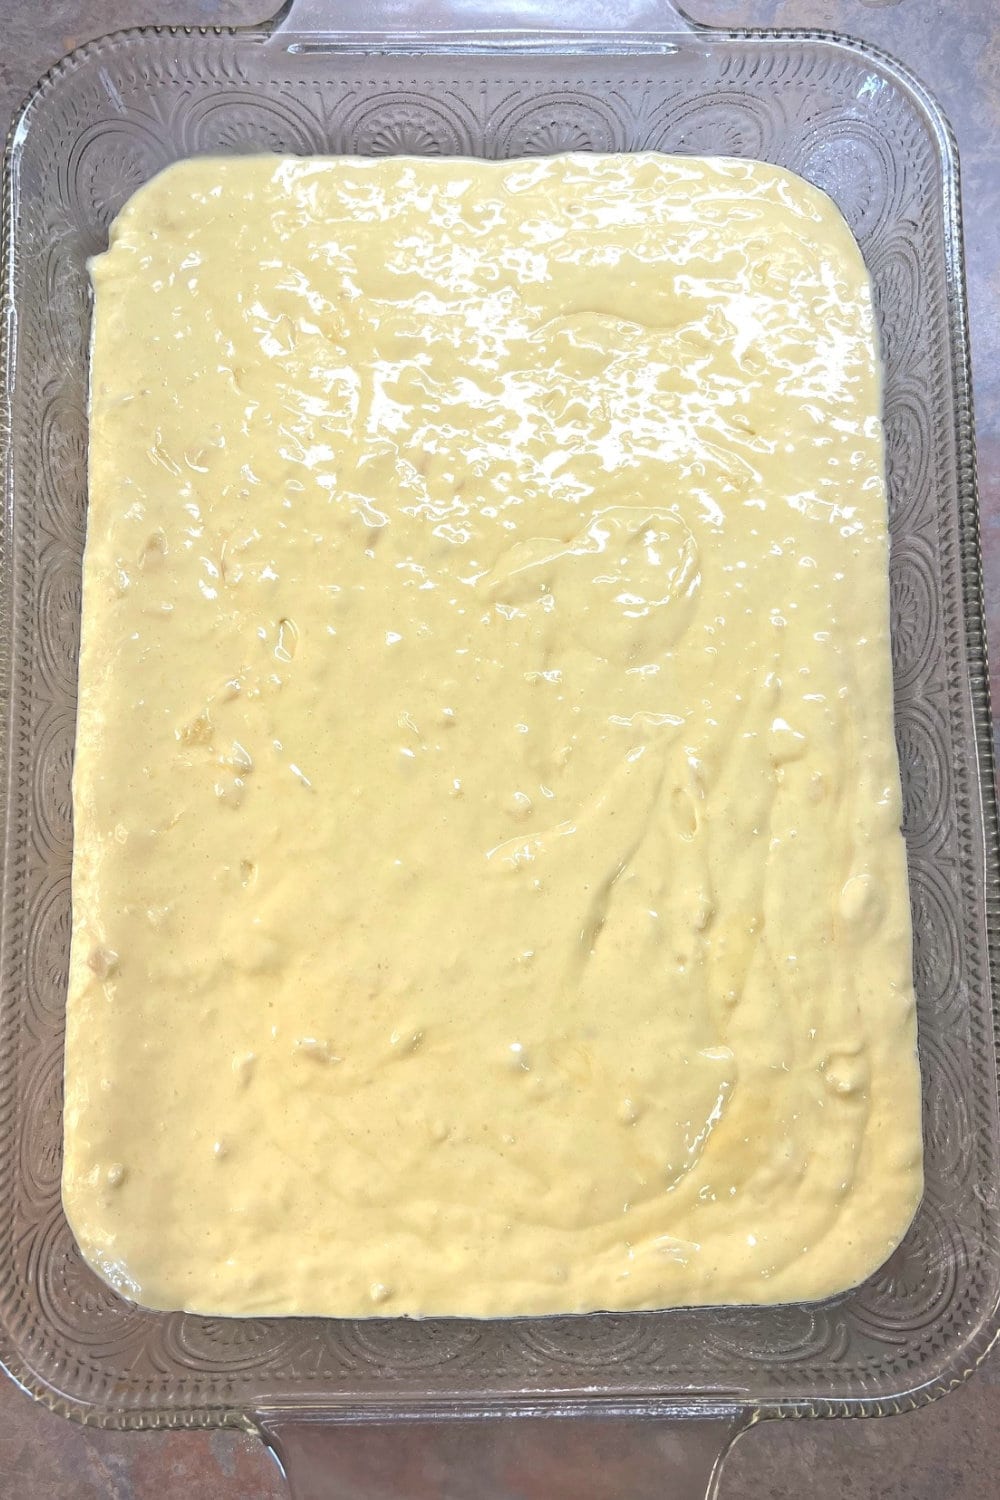 Sunshine Cake batter spread evenly in a 9x13 baking pan. 